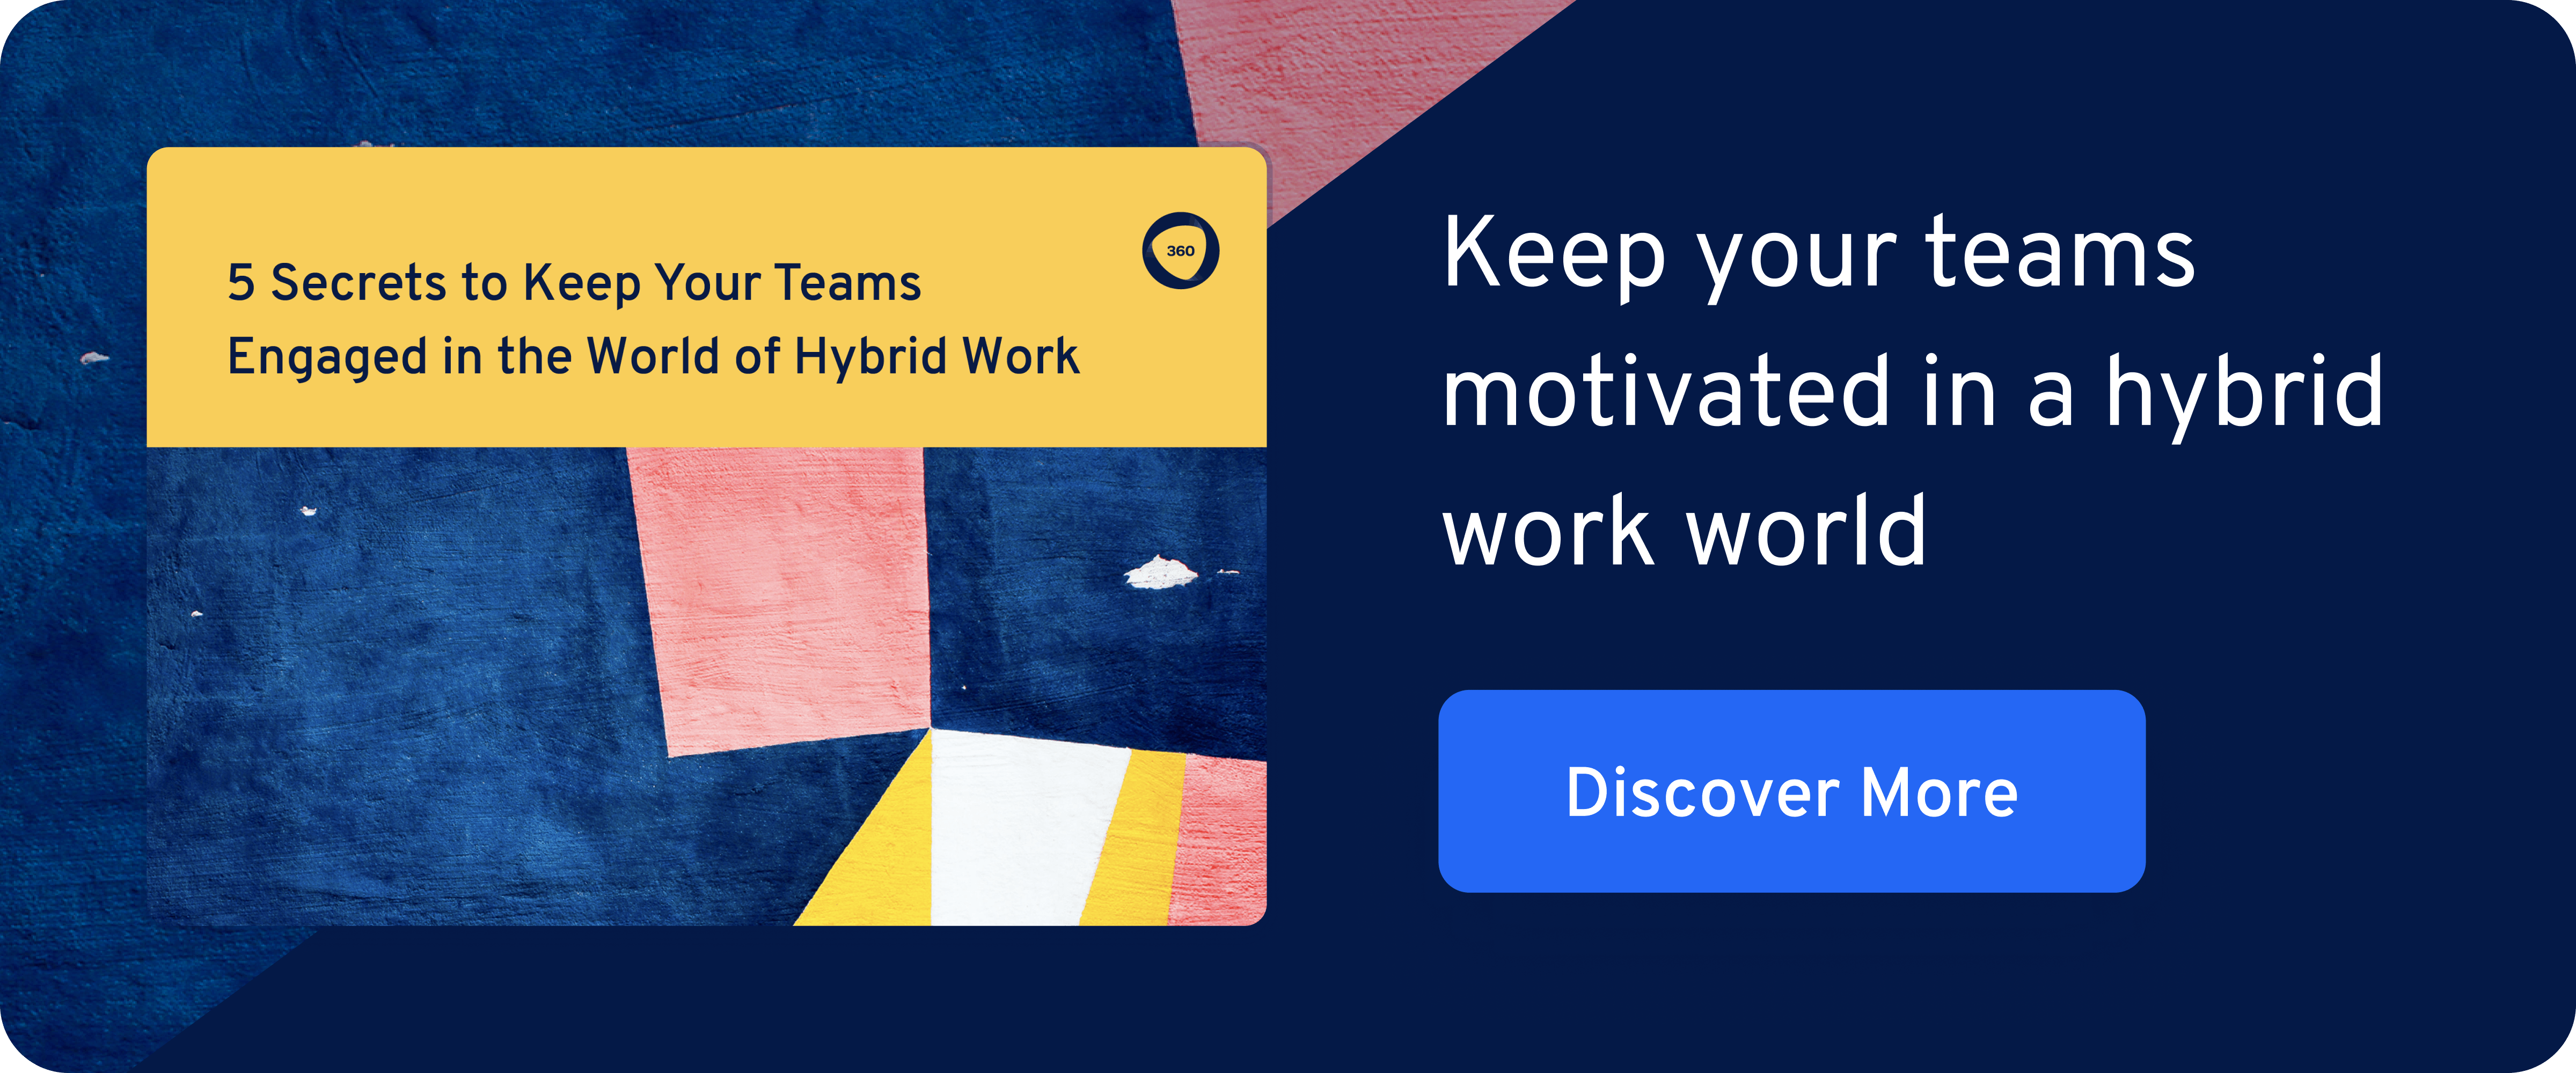 5 Secrets to Keep Your Teams Engaged in the World of Hybrid Work